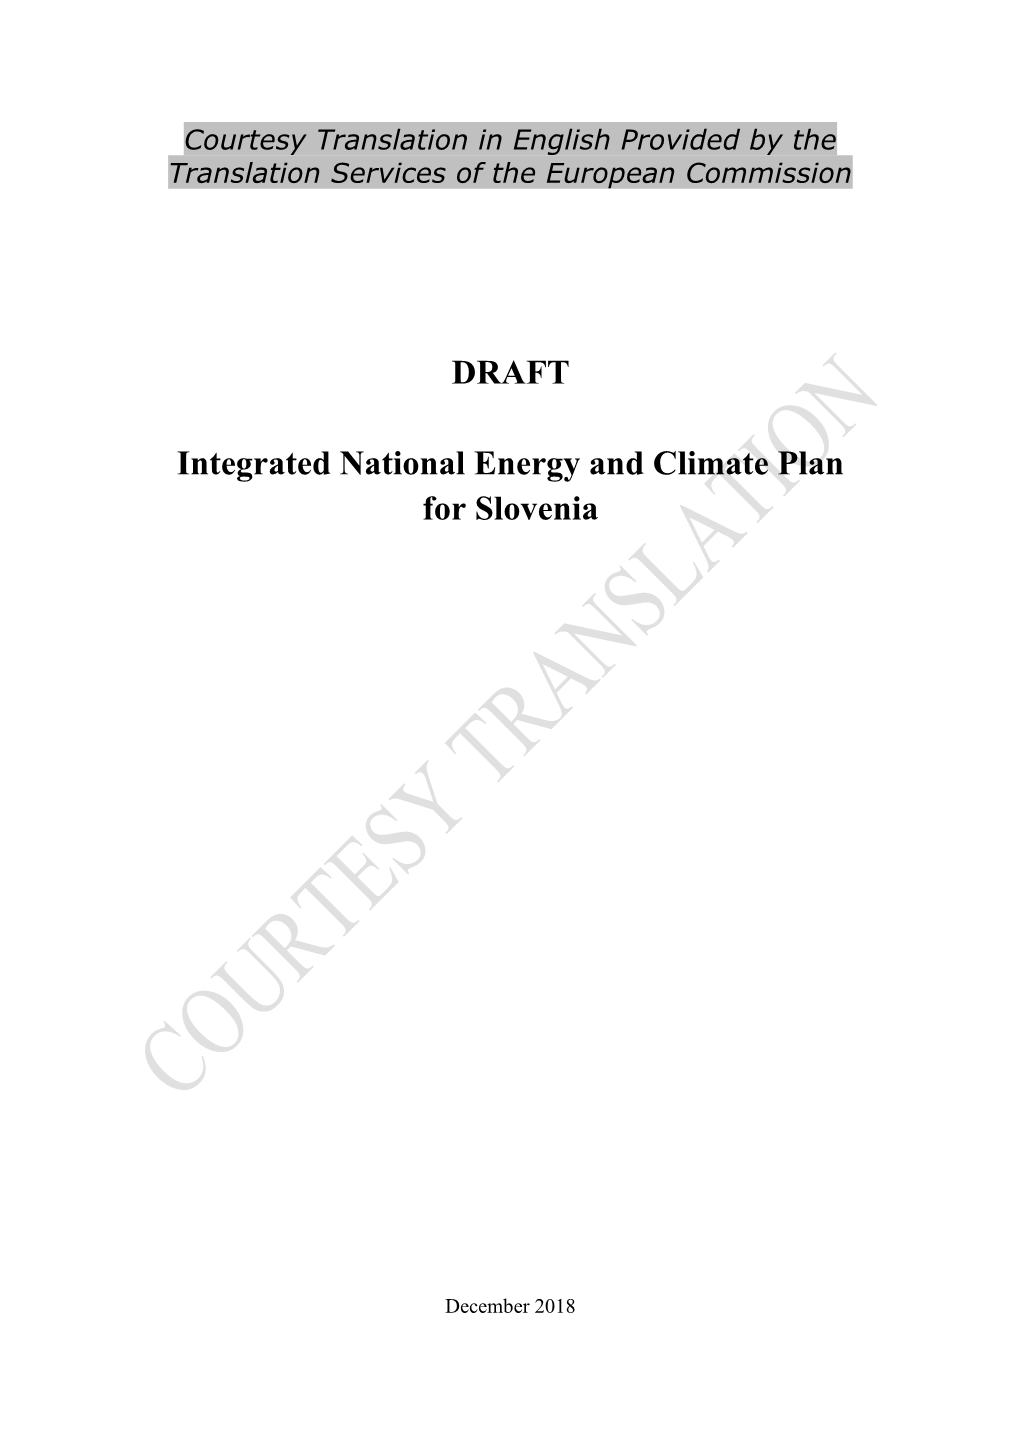 DRAFT Integrated National Energy and Climate Plan for Slovenia